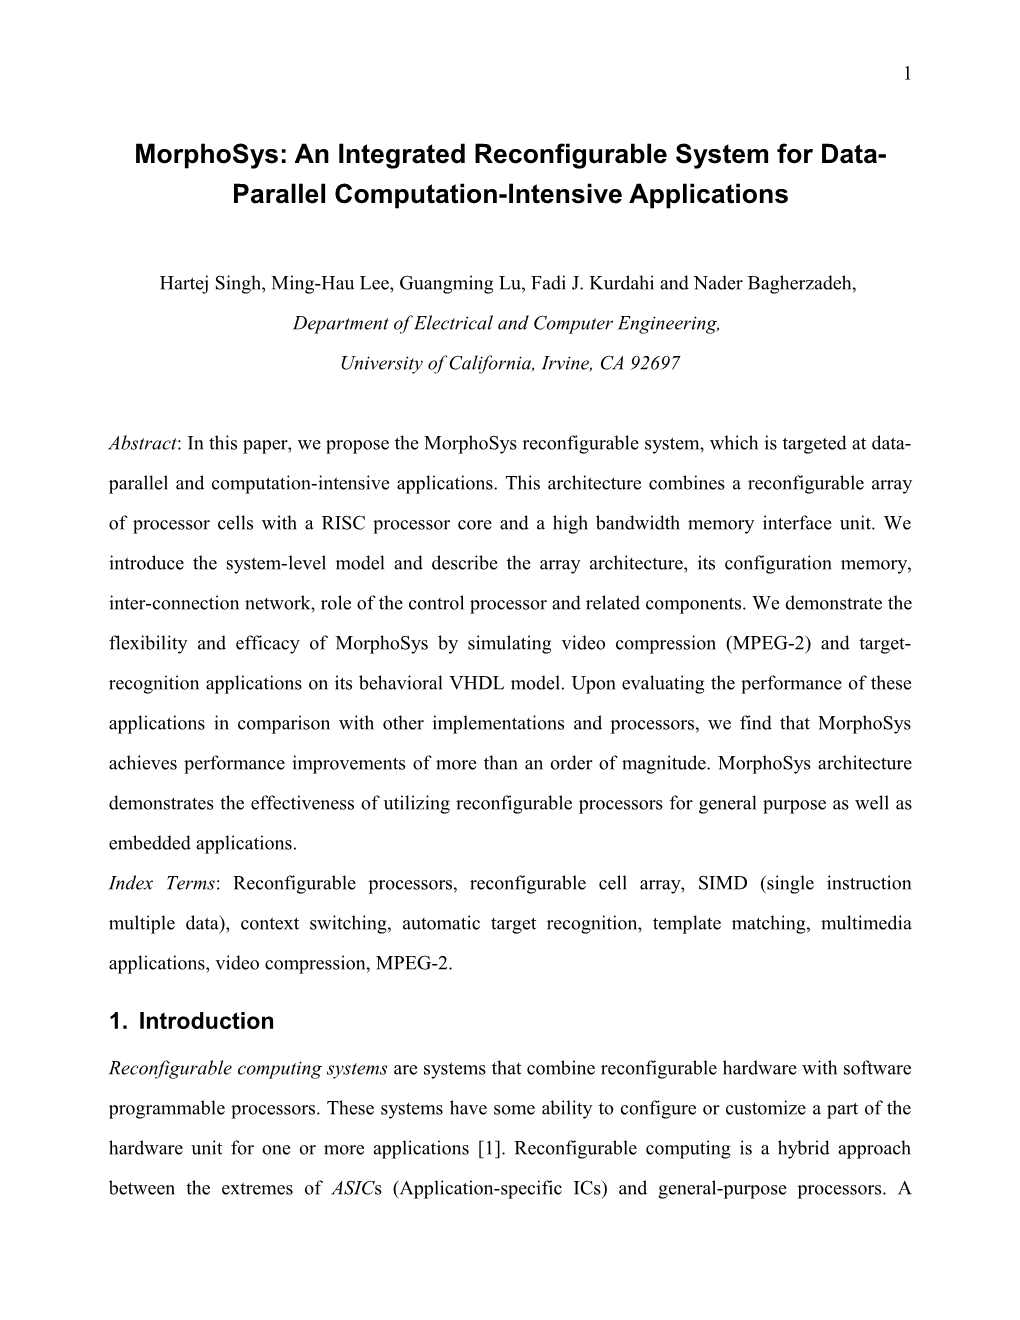 Morphosys : an Integrated Reconfigurable System for Data-Parallel Computation-Intensive